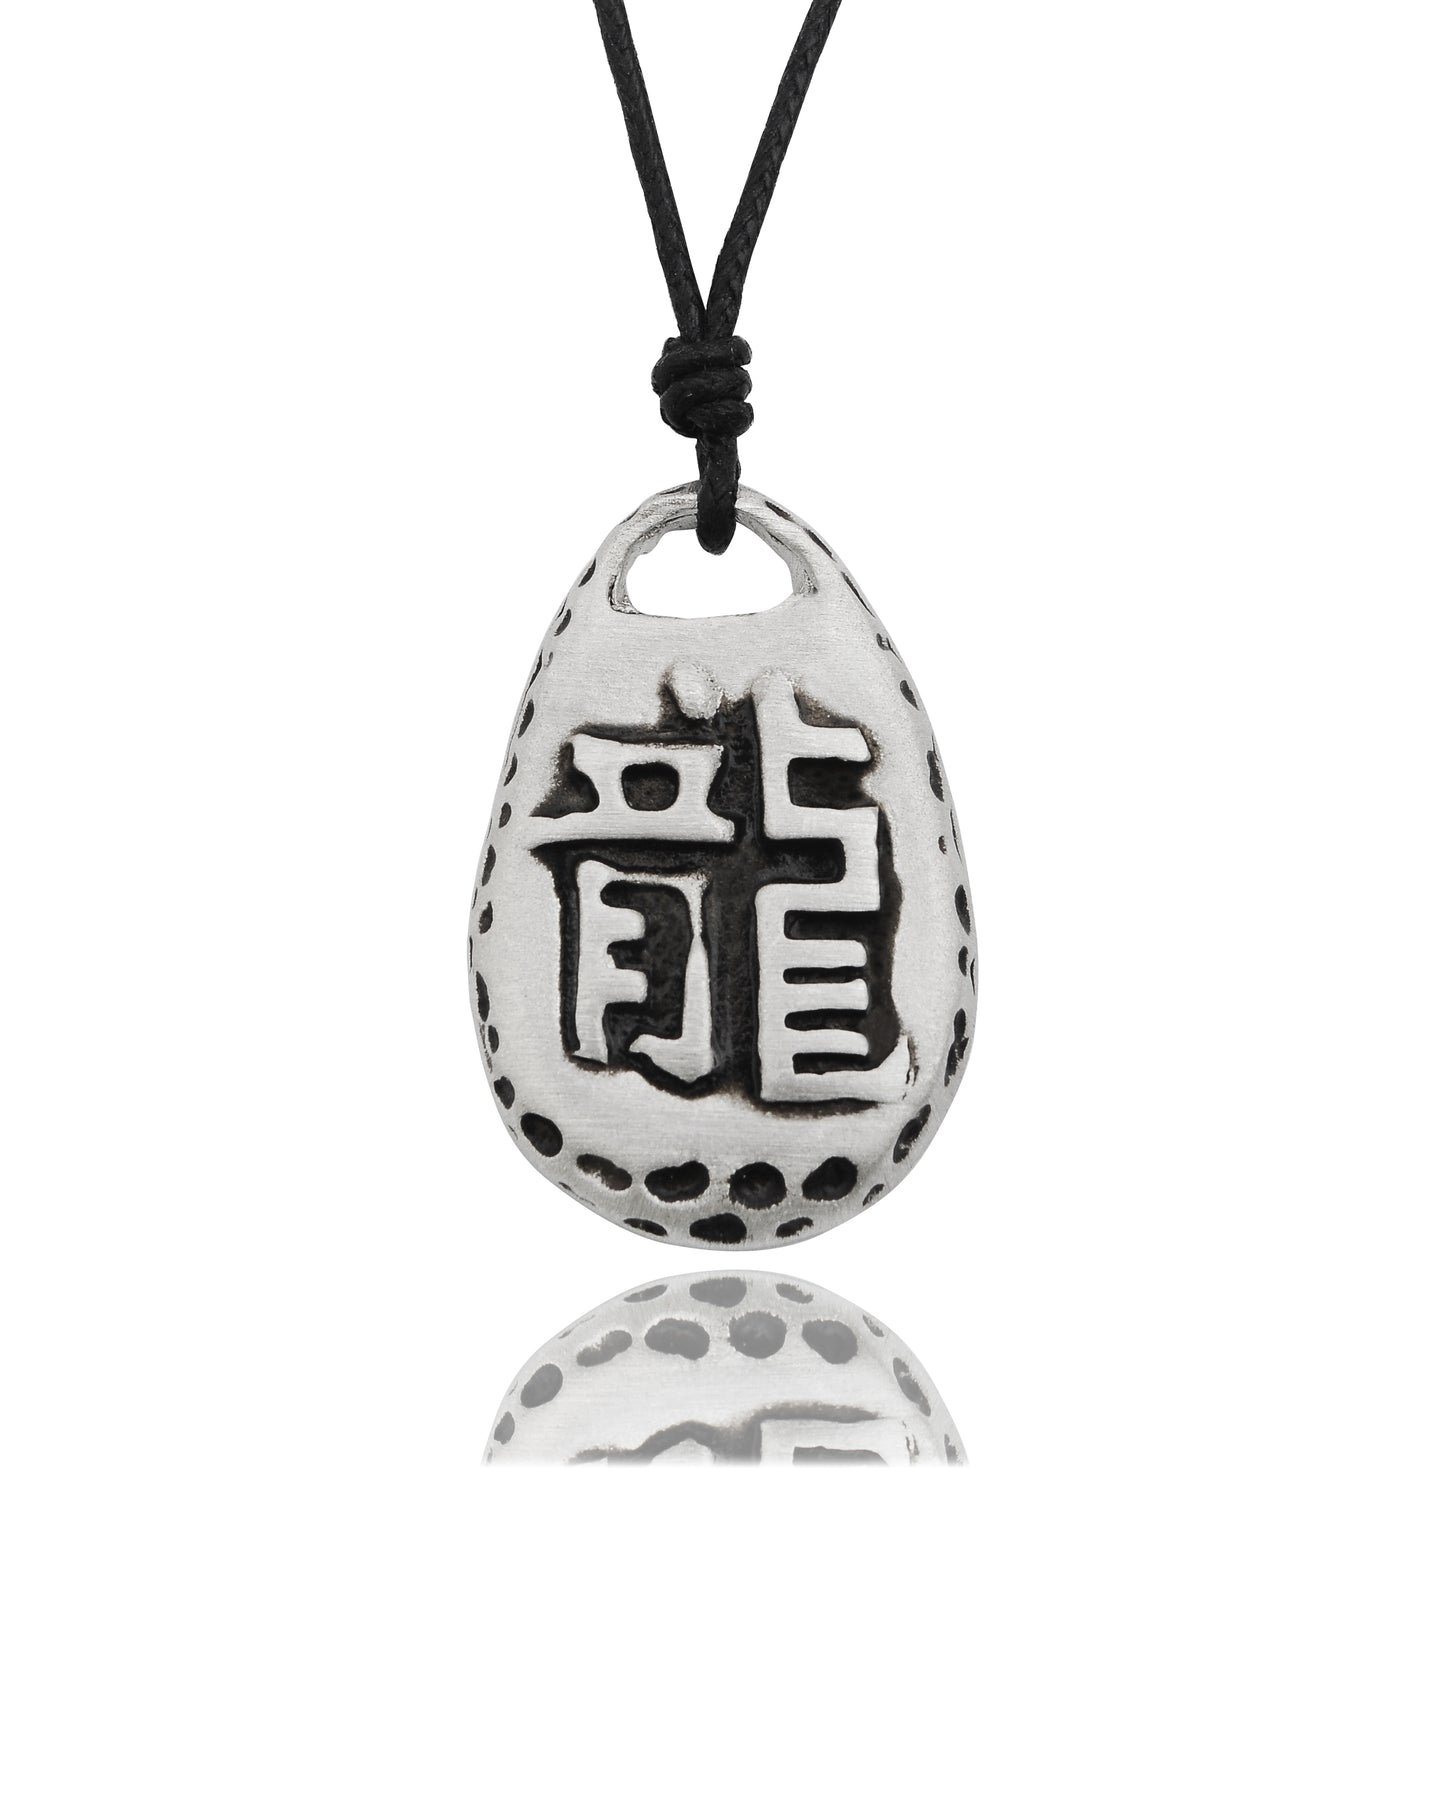 Chinese Zodiac Text Silver Pewter Charm Necklace Pendant Jewelry